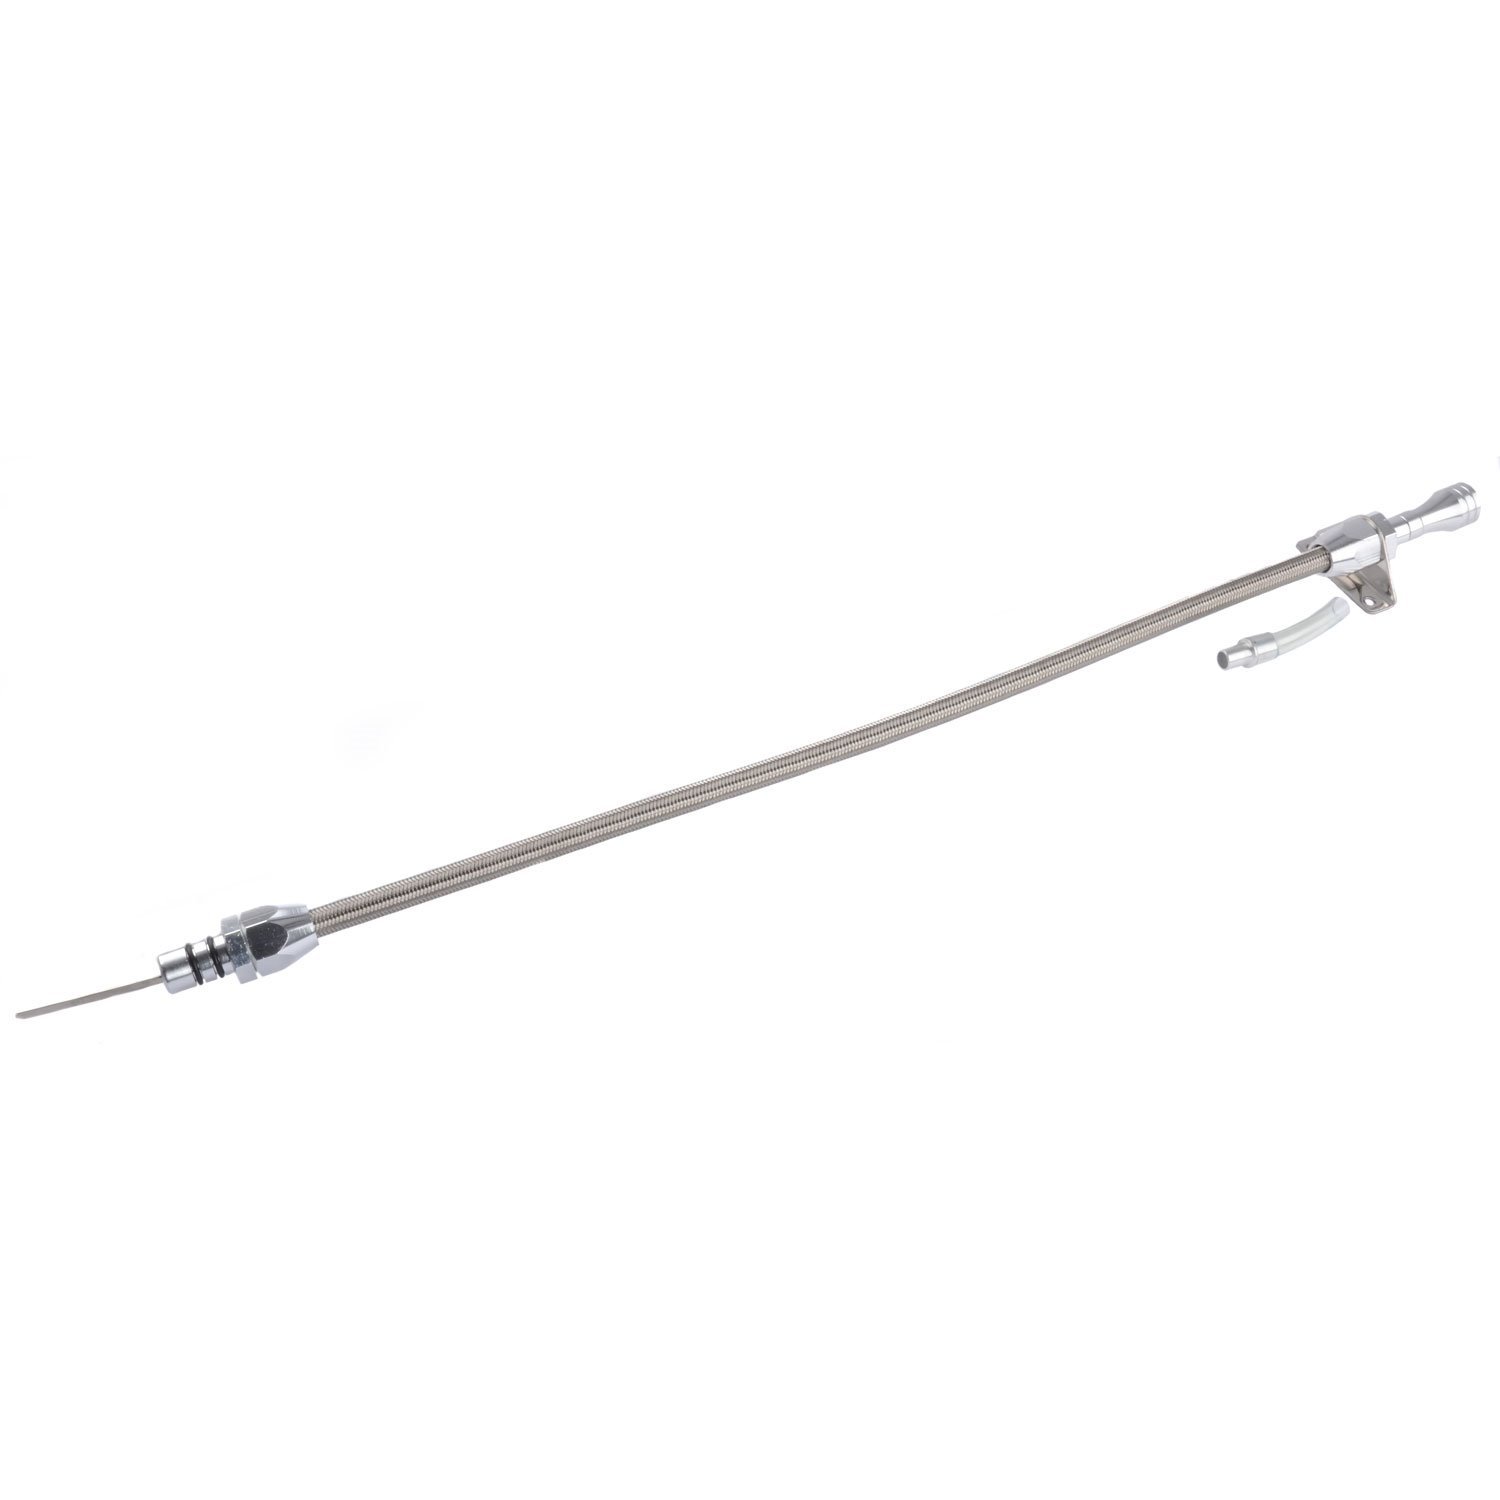 Flexible Braided Transmission Dipstick for GM 4L60E [Polished]